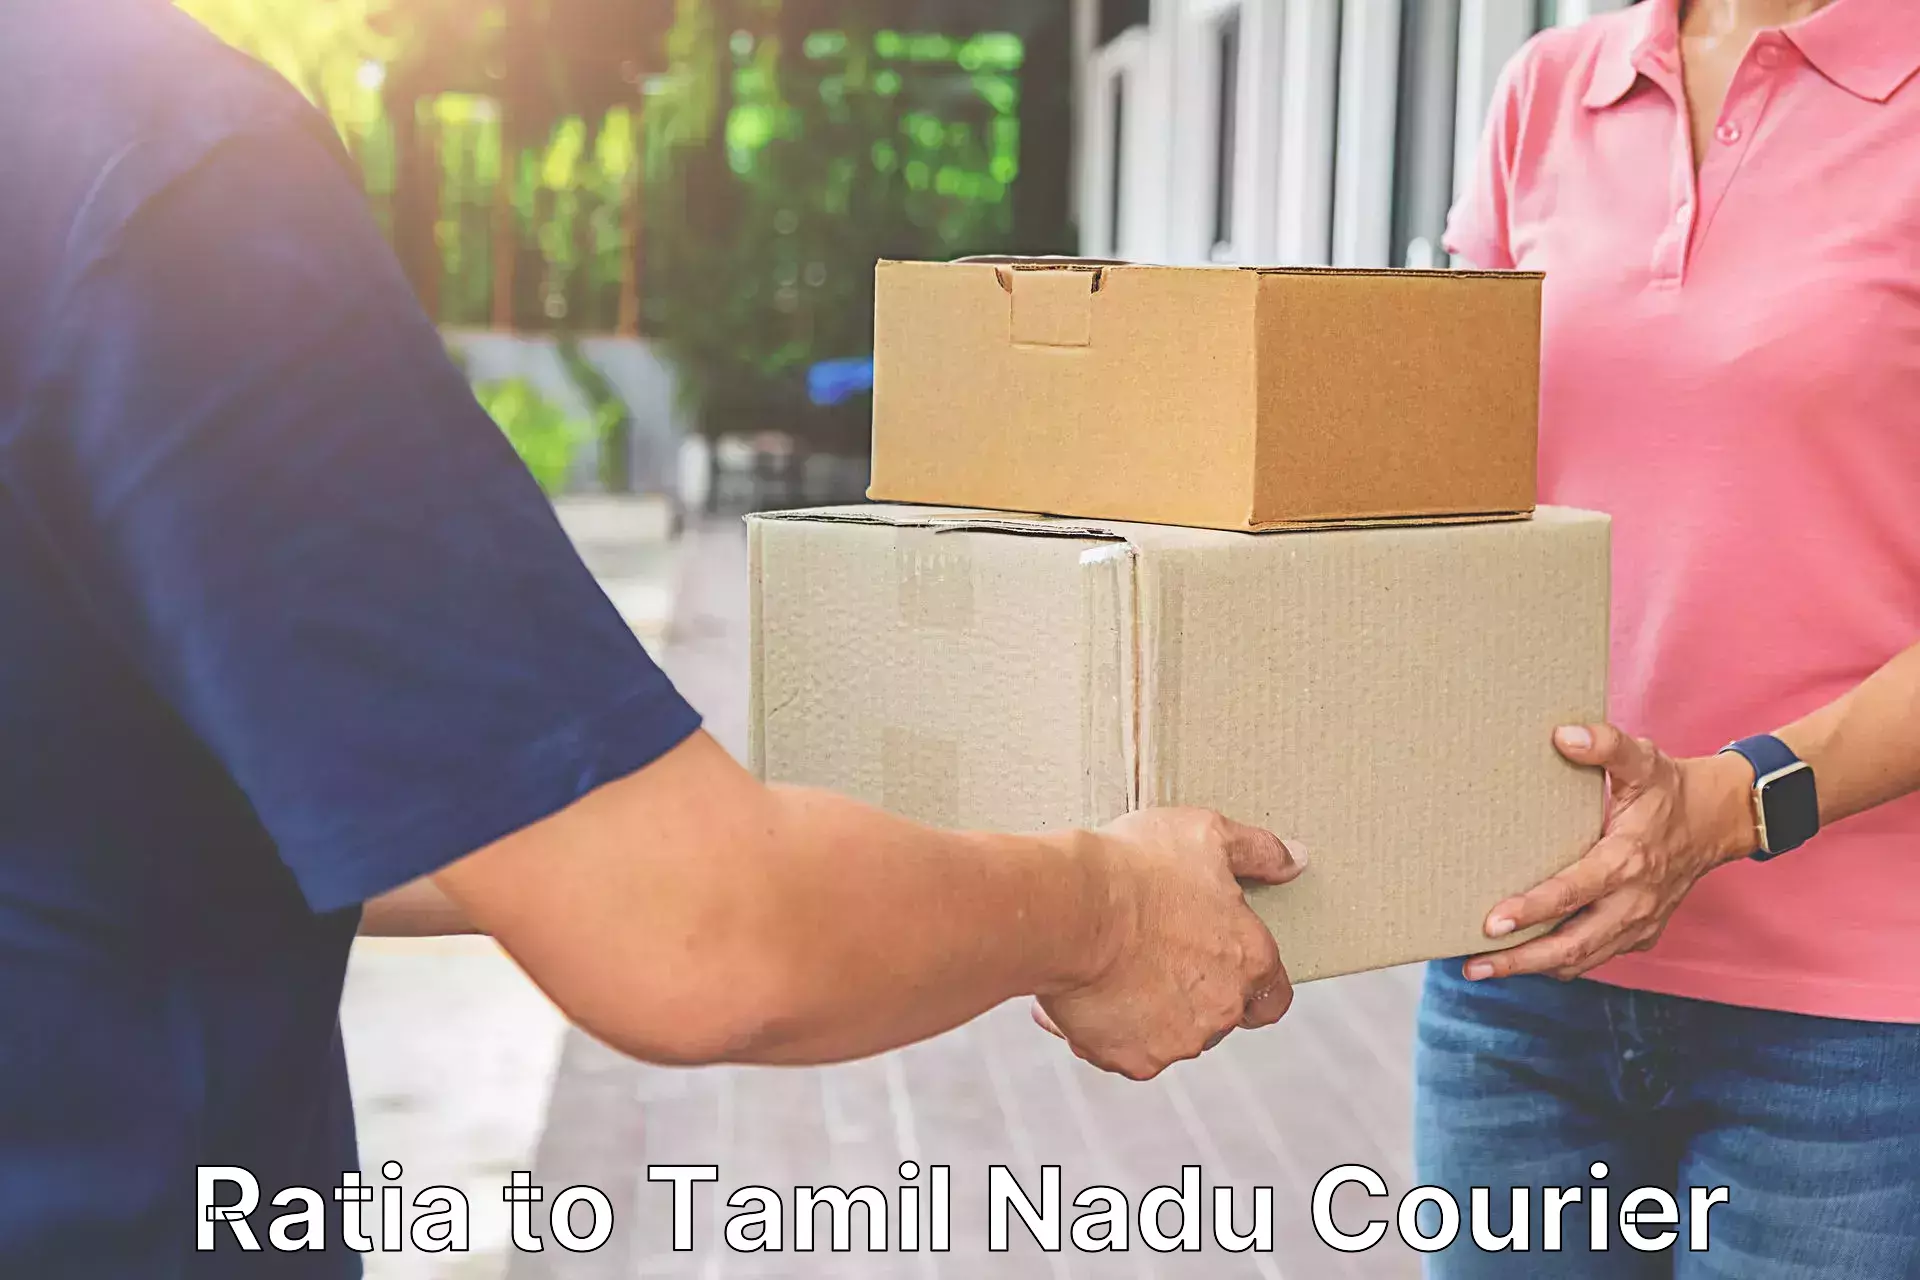 Overnight delivery services Ratia to Thiruthuraipoondi